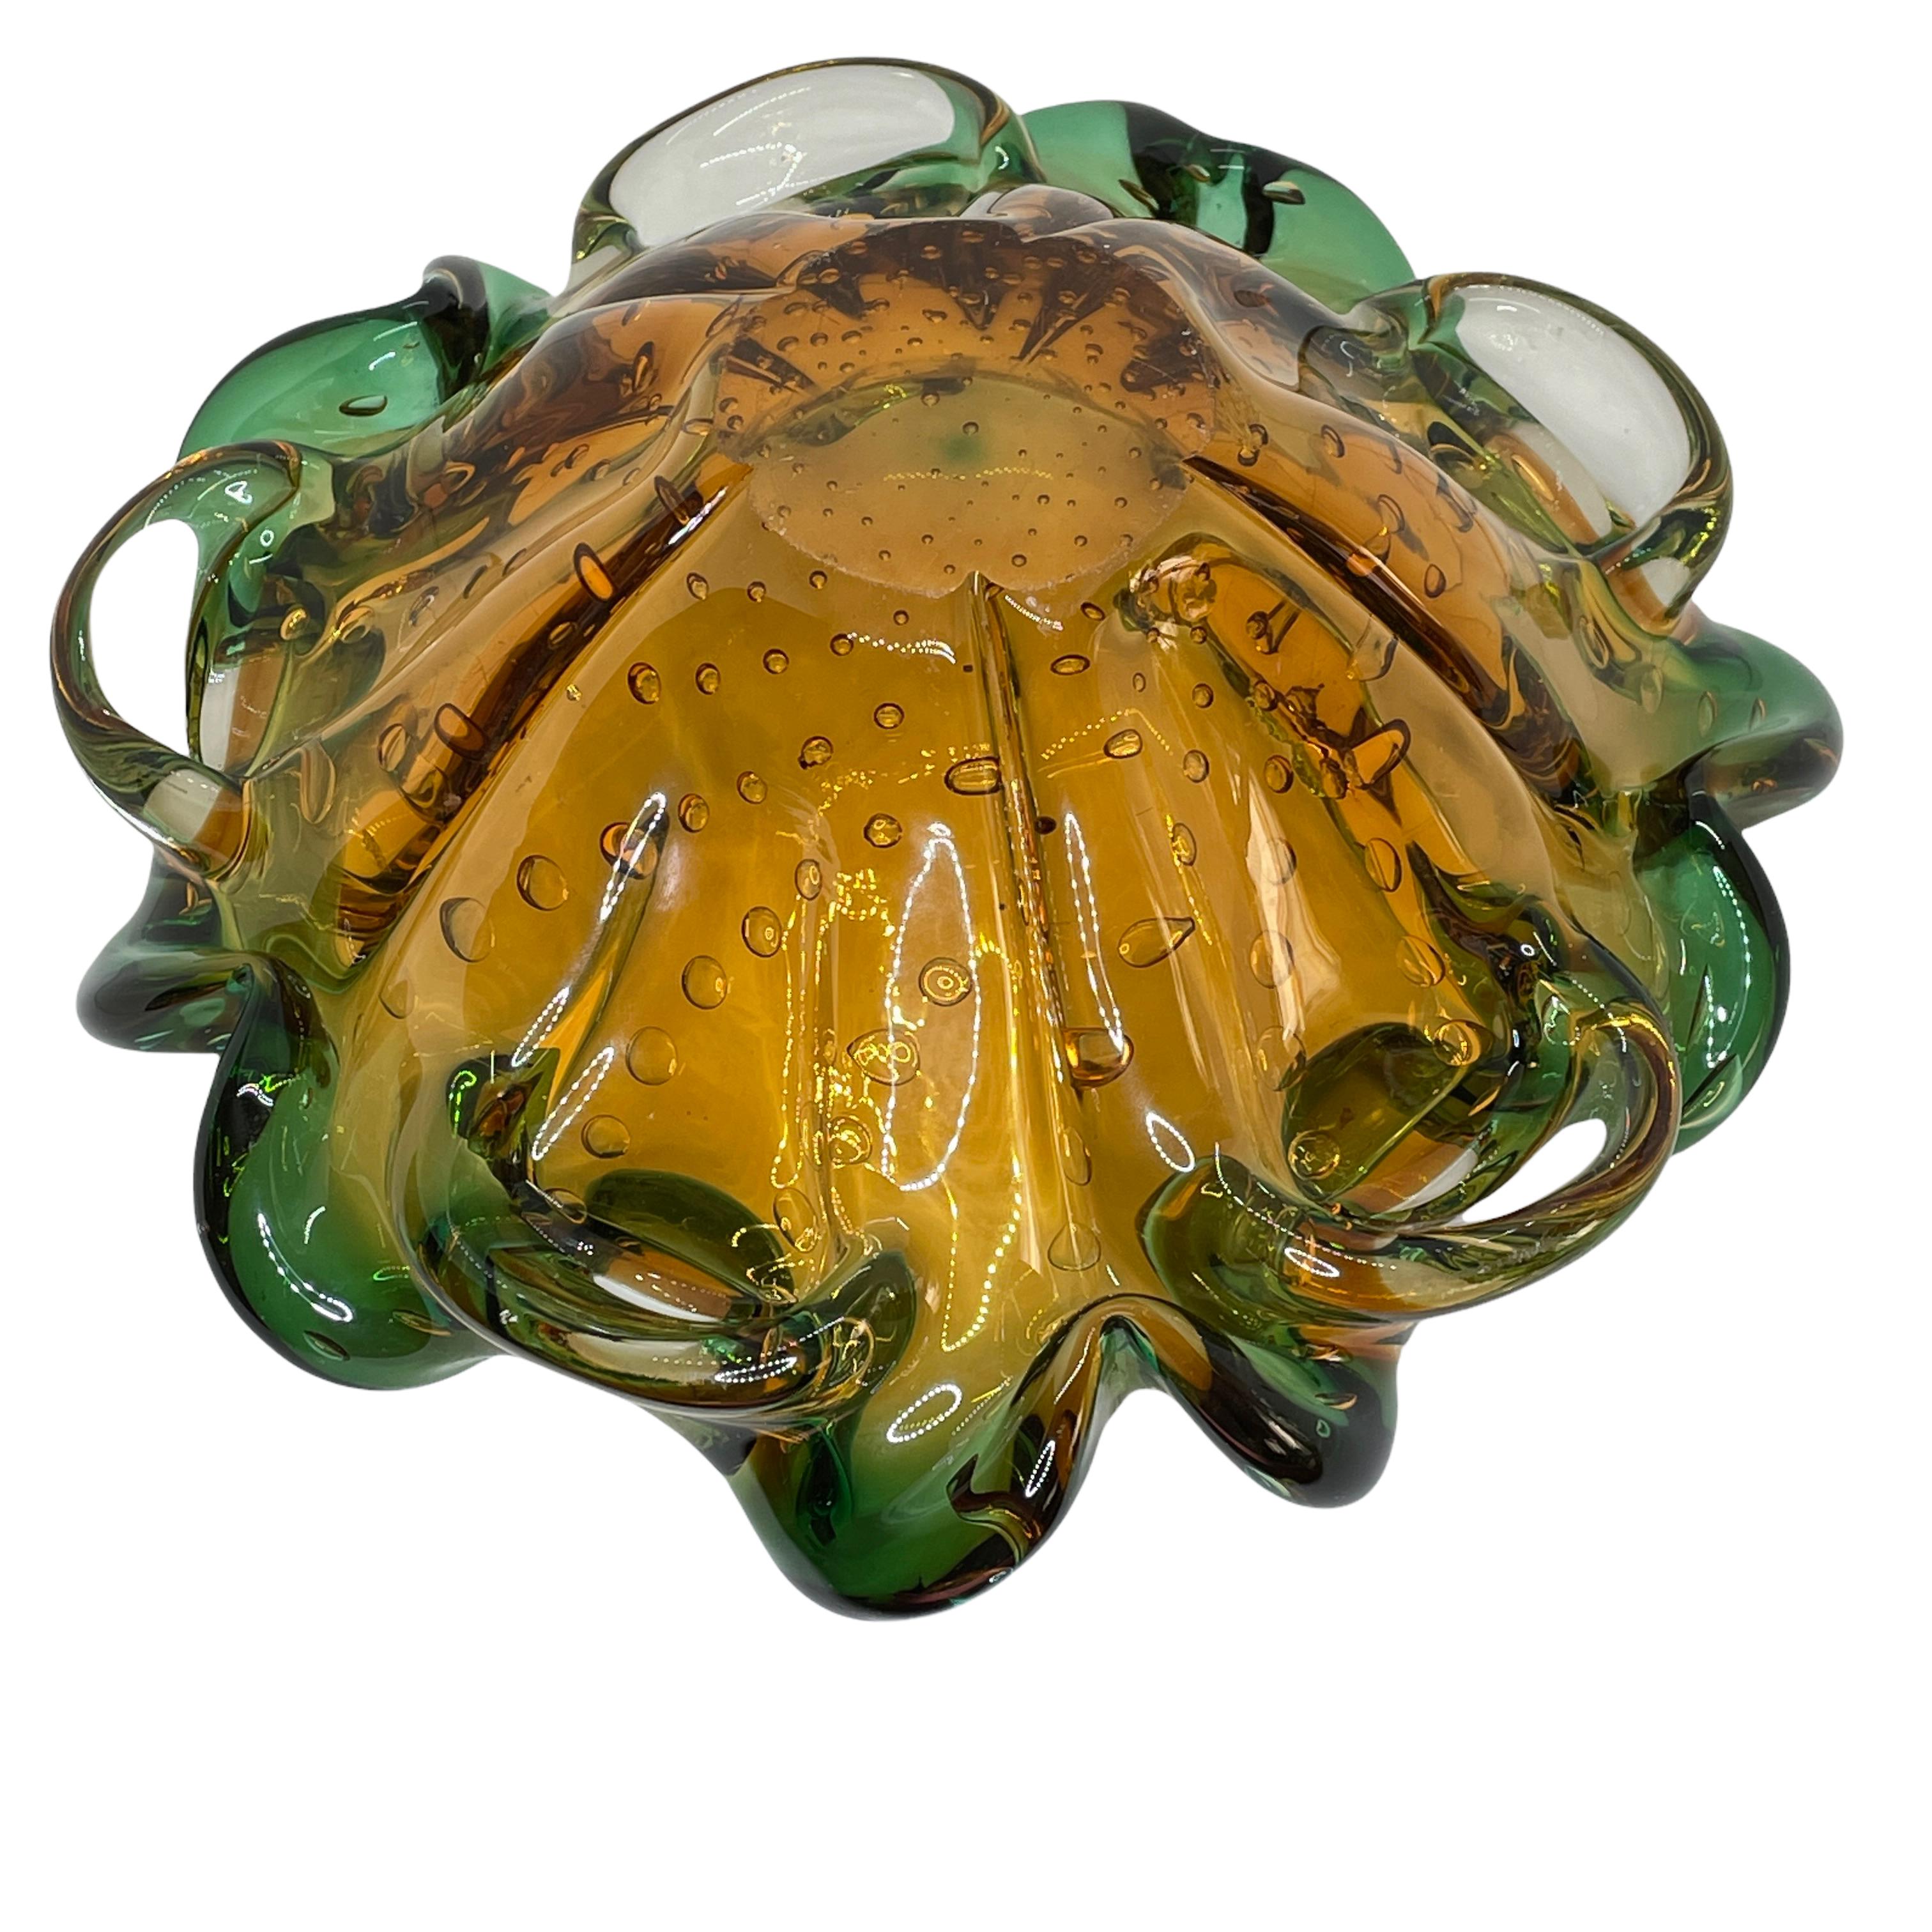 Murano Art Glass Green and Amber Fruit Bowl Catchall Italy, Sommerso, 1970s For Sale 2